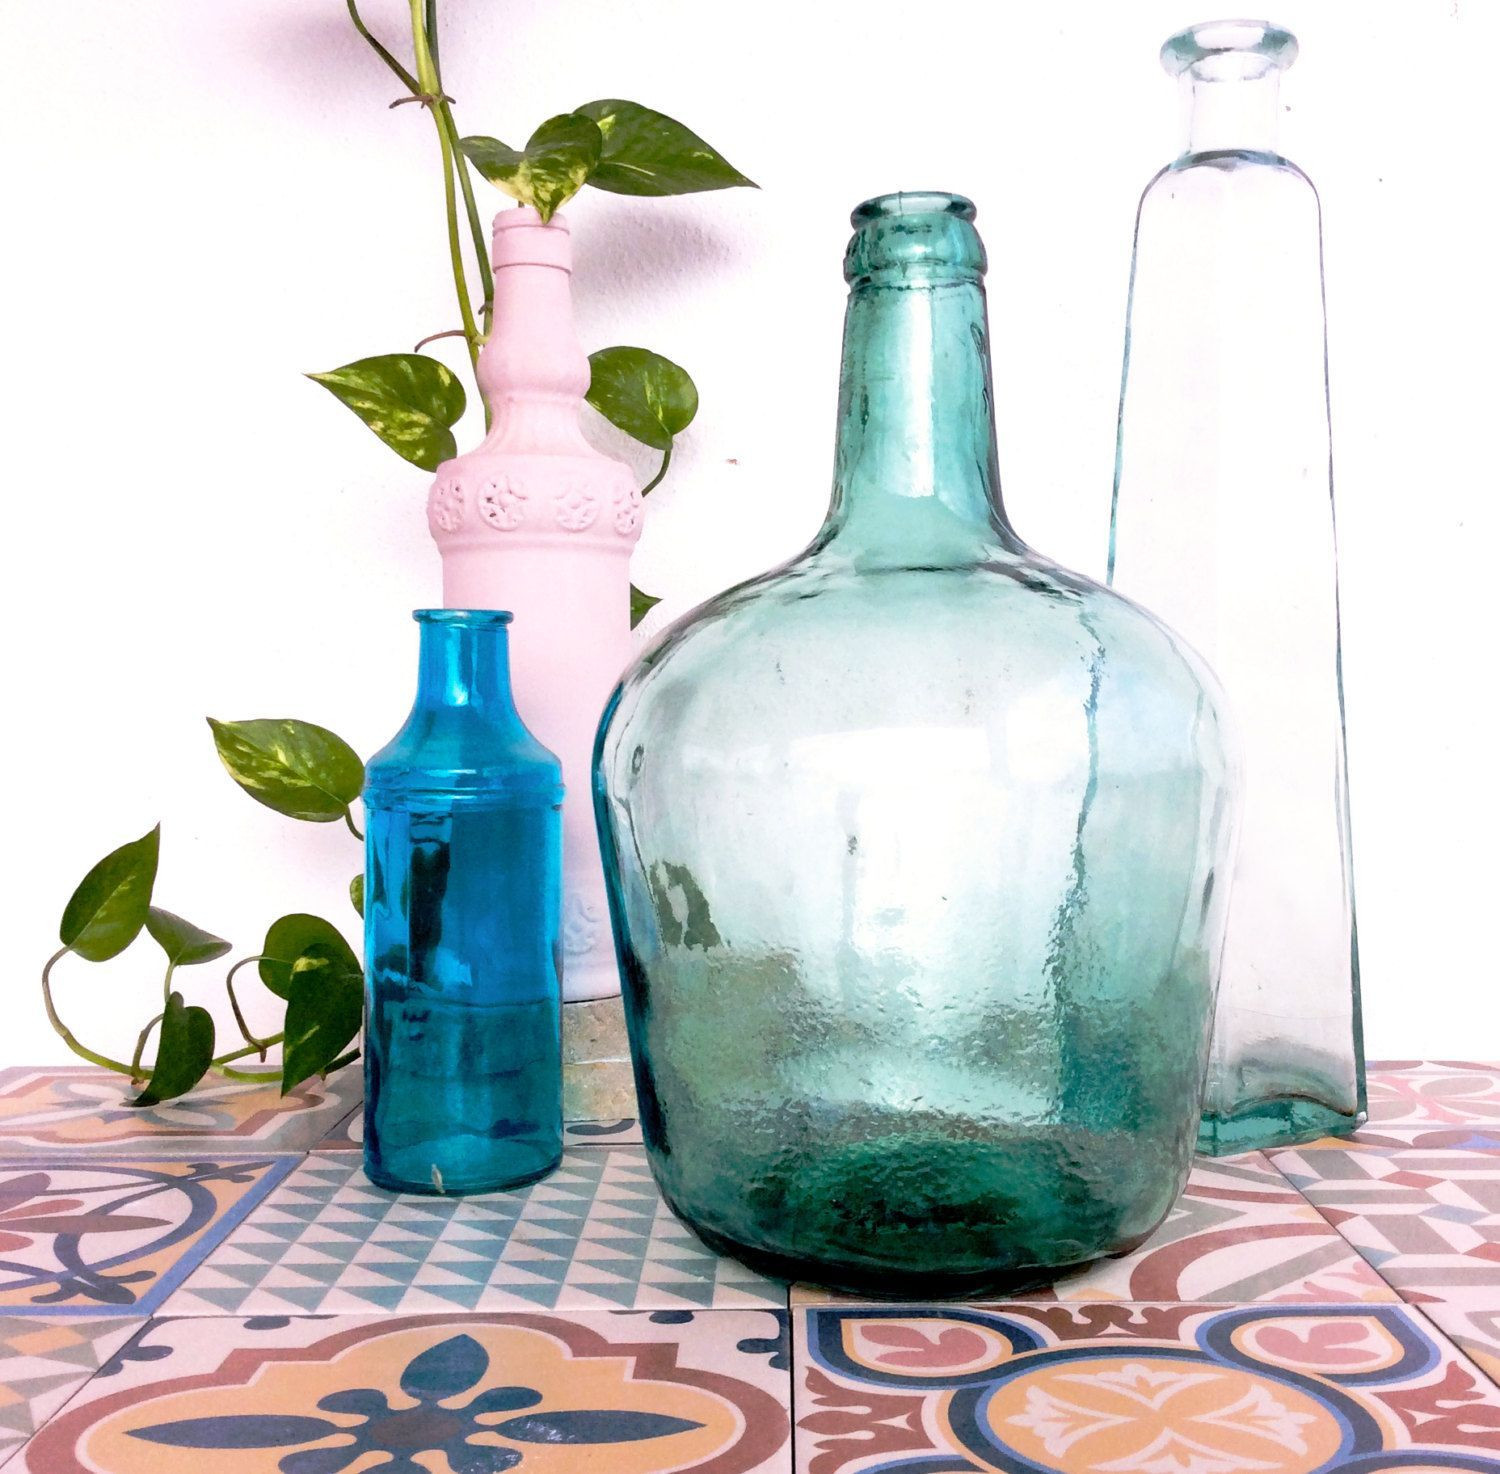 18 attractive Small Antique Glass Vases 2024 free download small antique glass vases of 35 antique green glass vases the weekly world with regard to vintage viresa demijohn green glass bottle from spain by noaparis